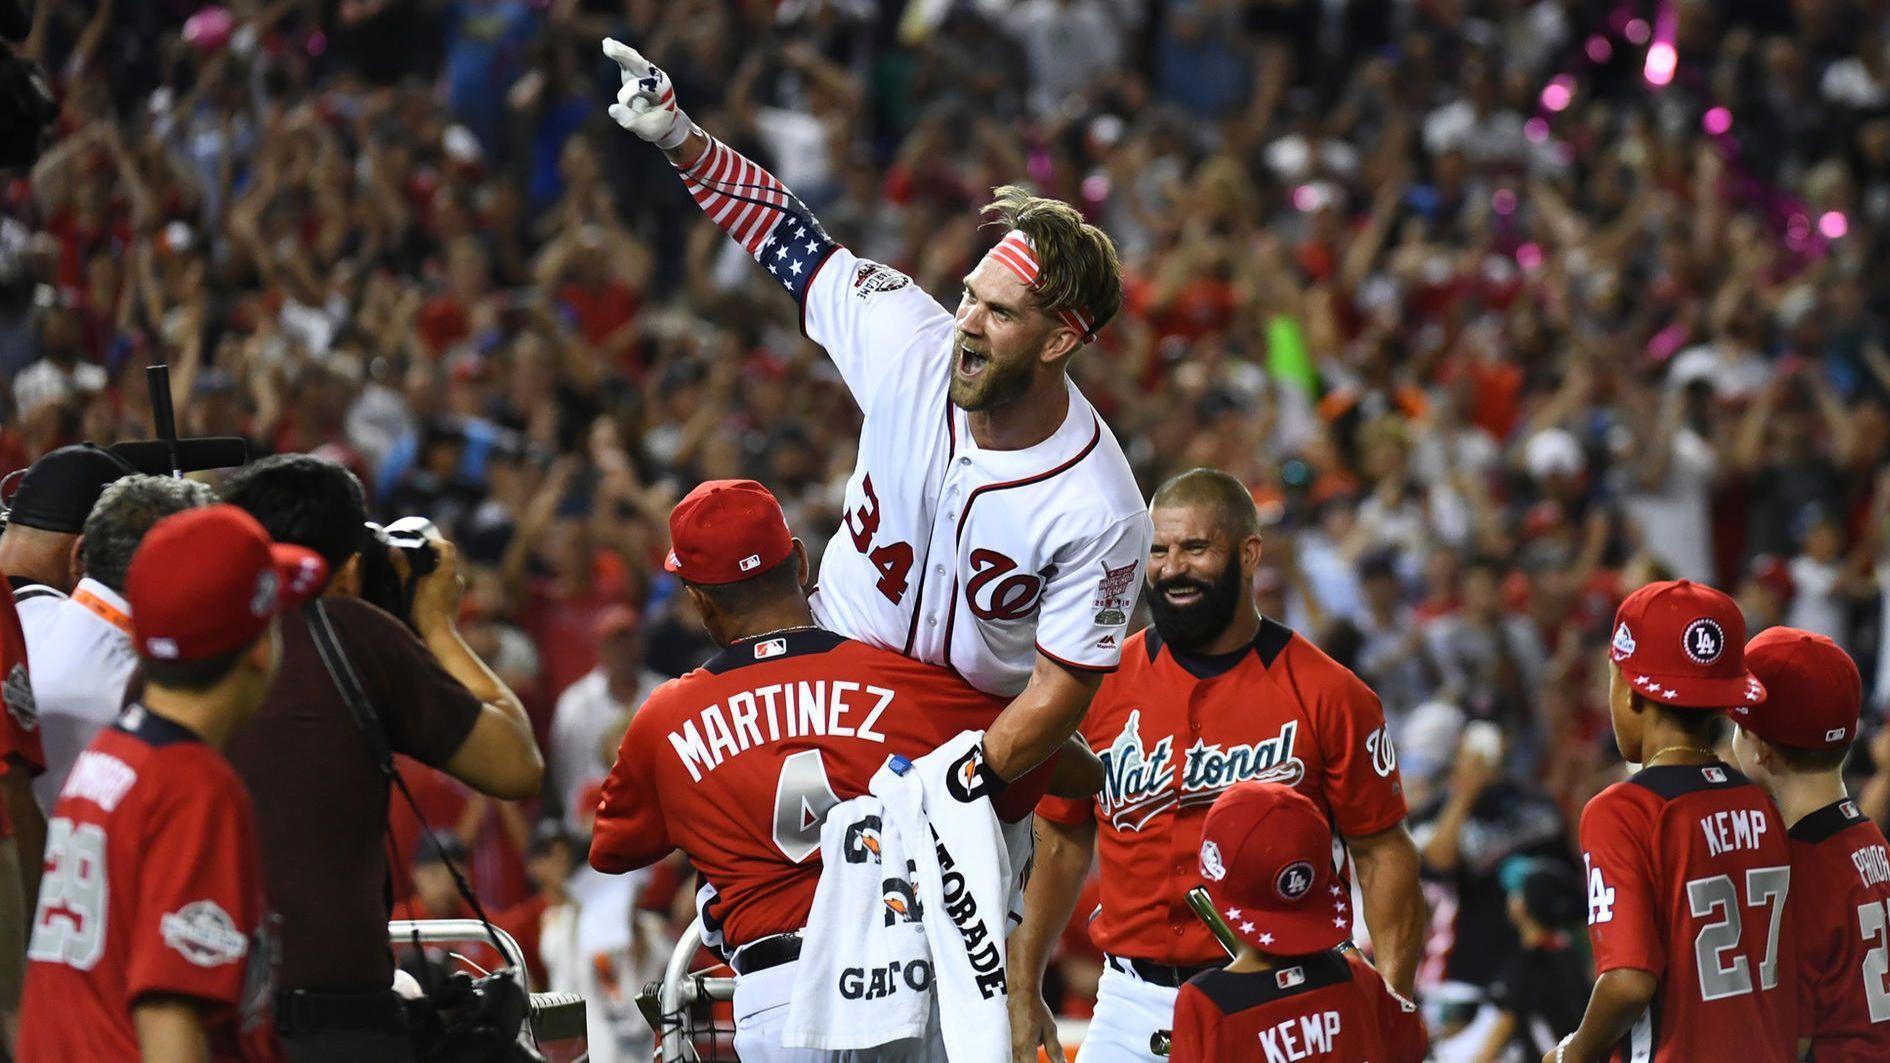 Bryce Harper's epic Home Run Derby duel with Kyle Schwarber will be hard to top ...